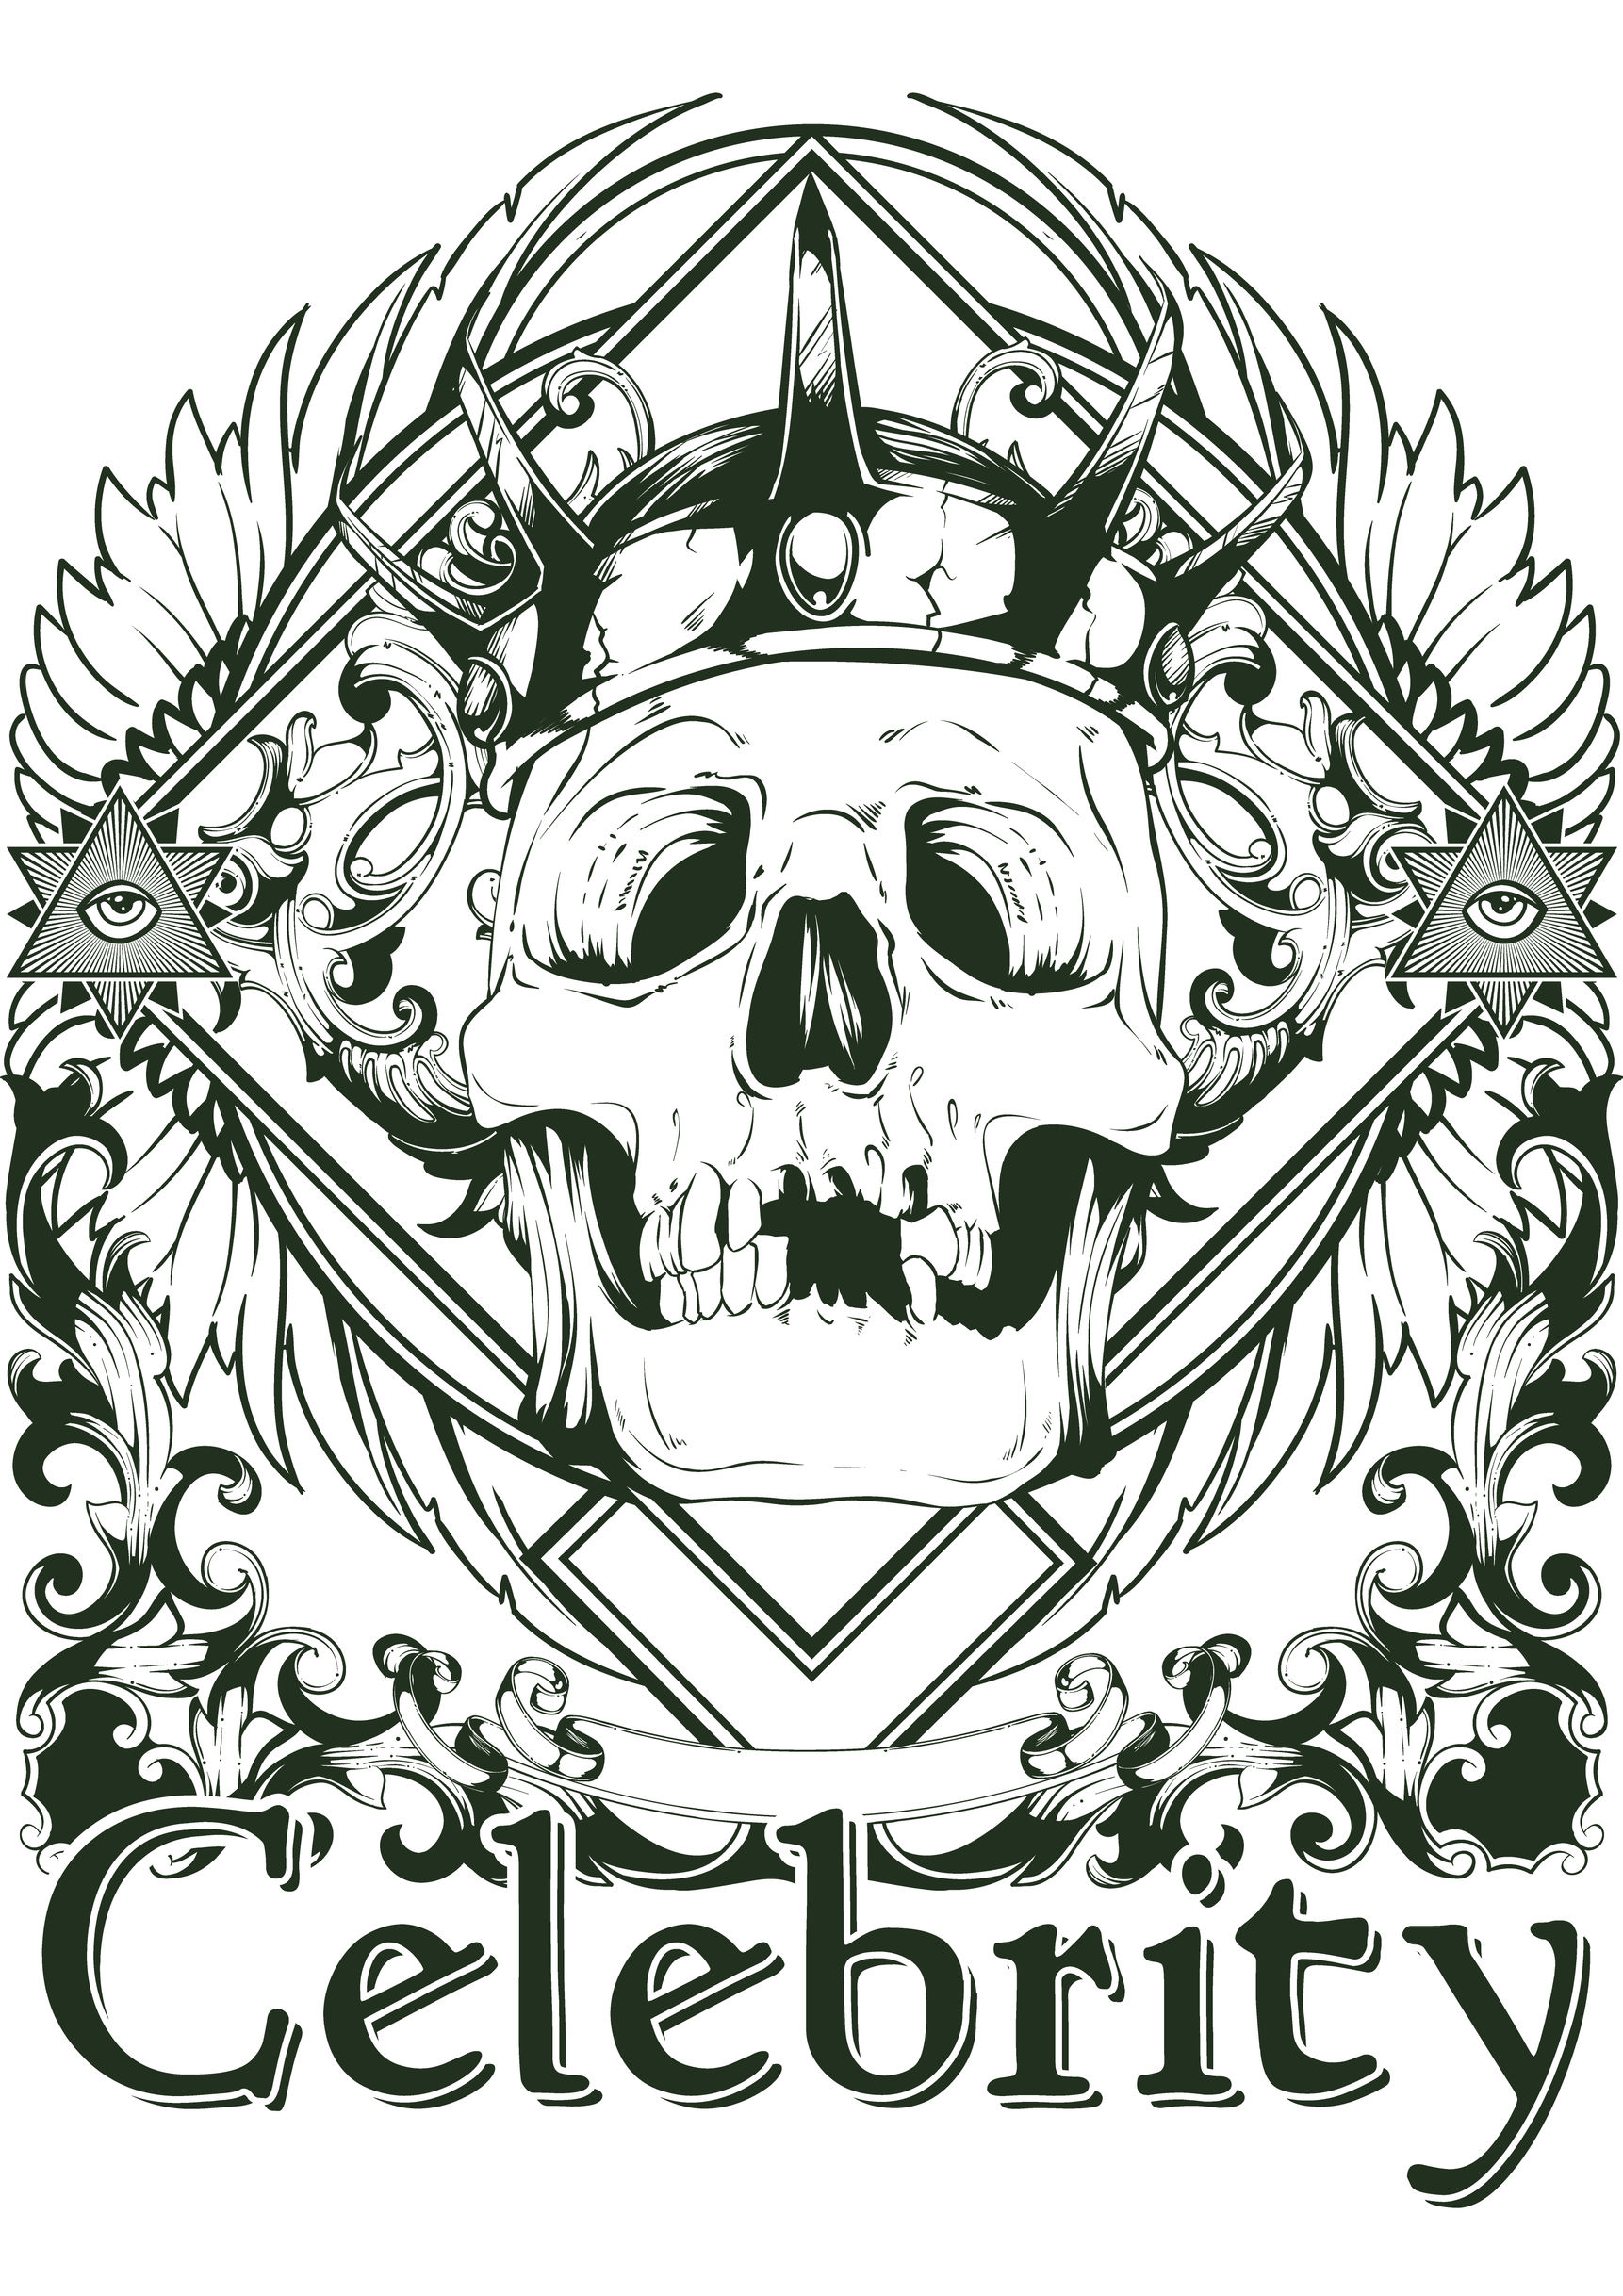 Tattoo skeleton celebrity - Tattoos Adult Coloring Pages